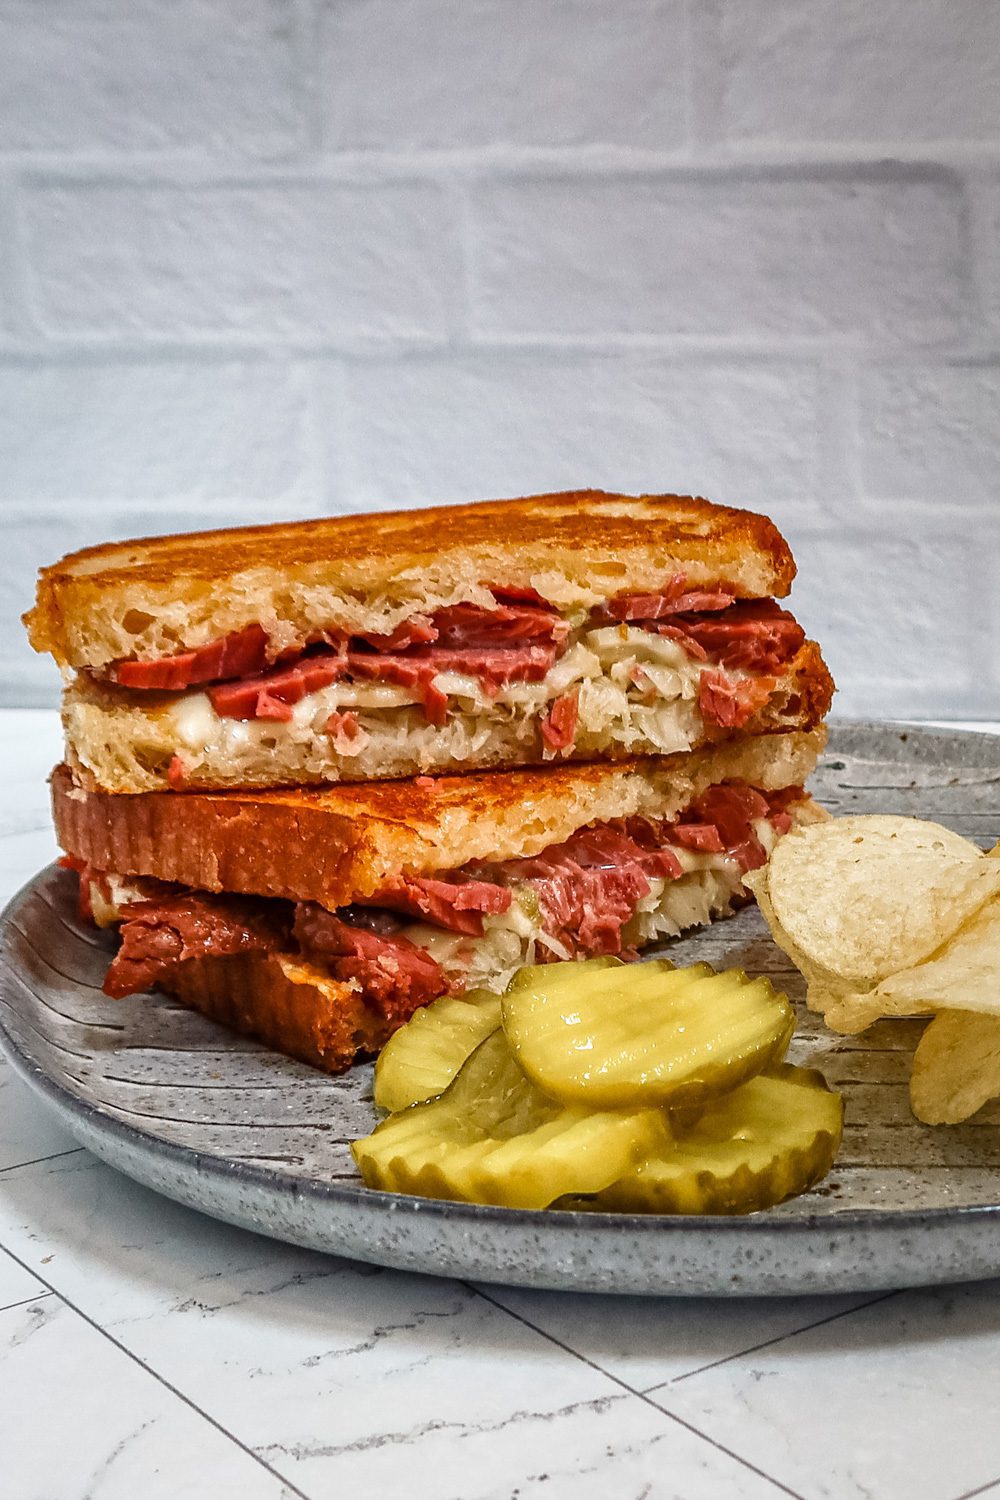 reuben sandwich on a plate with chips and pickles